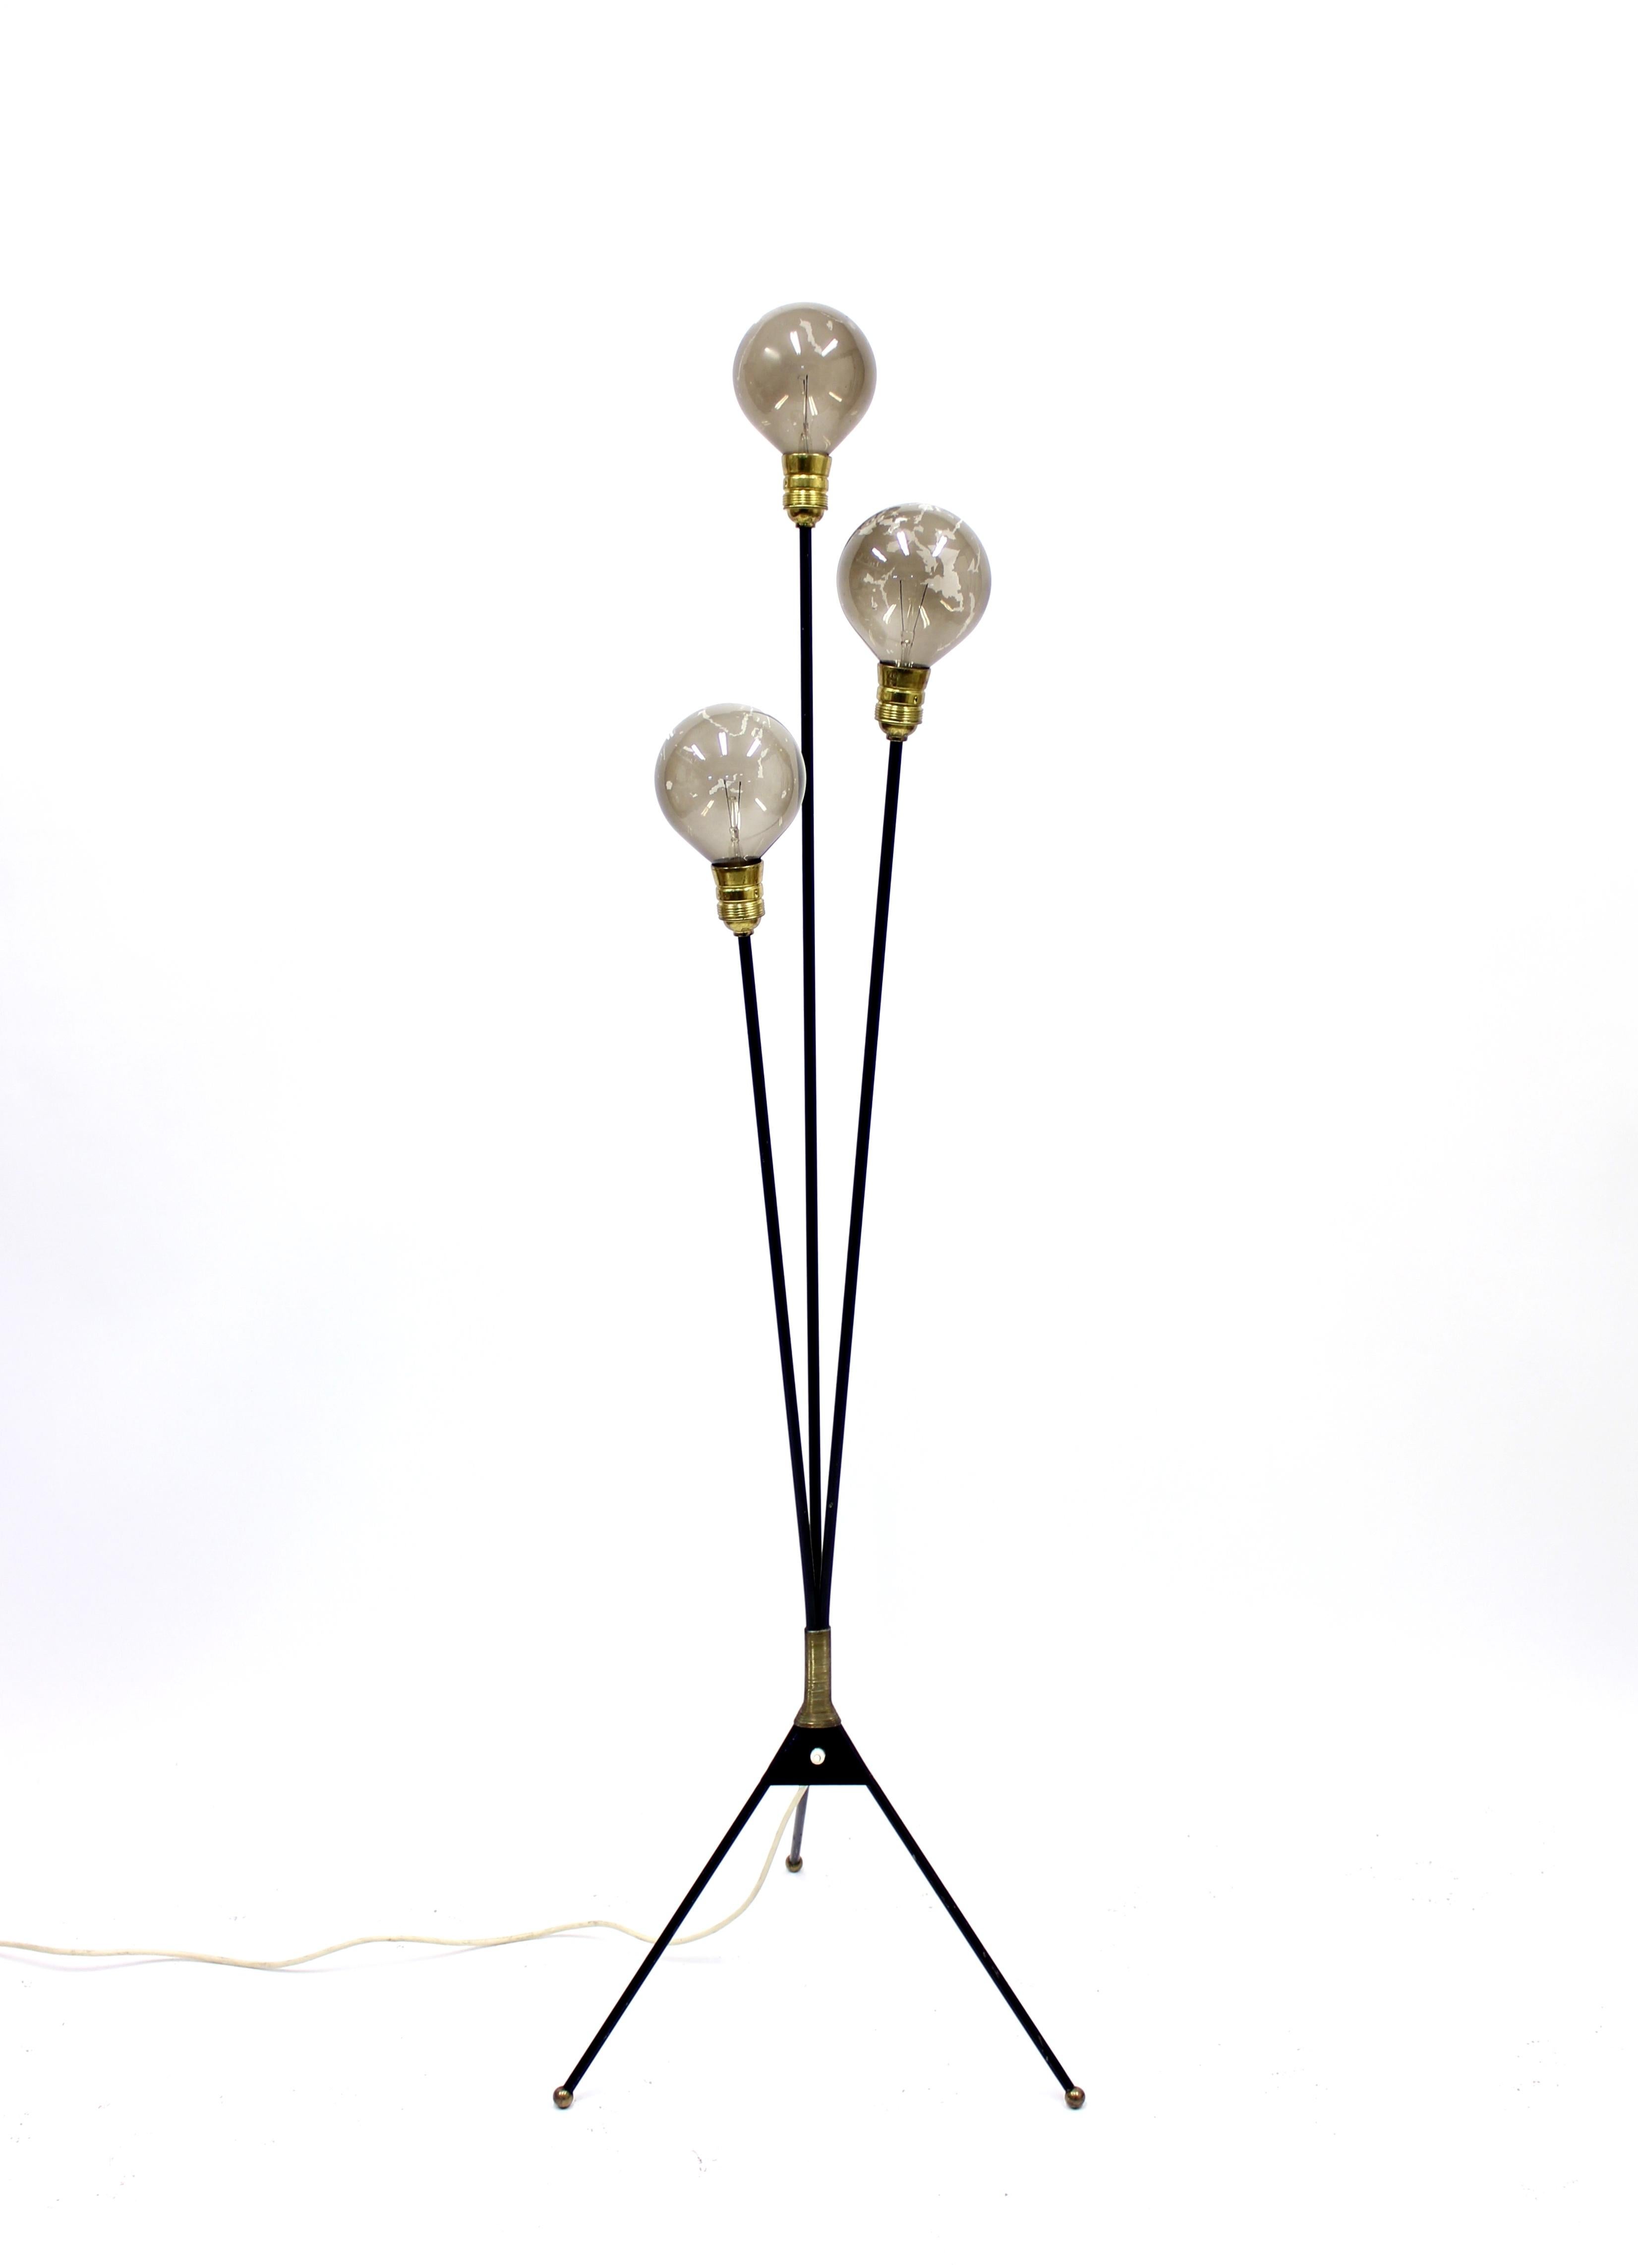 Swedish 3-light floor lamp on a tripod base with ball feet. Brass detail above the base. Ware consistent with age and use.